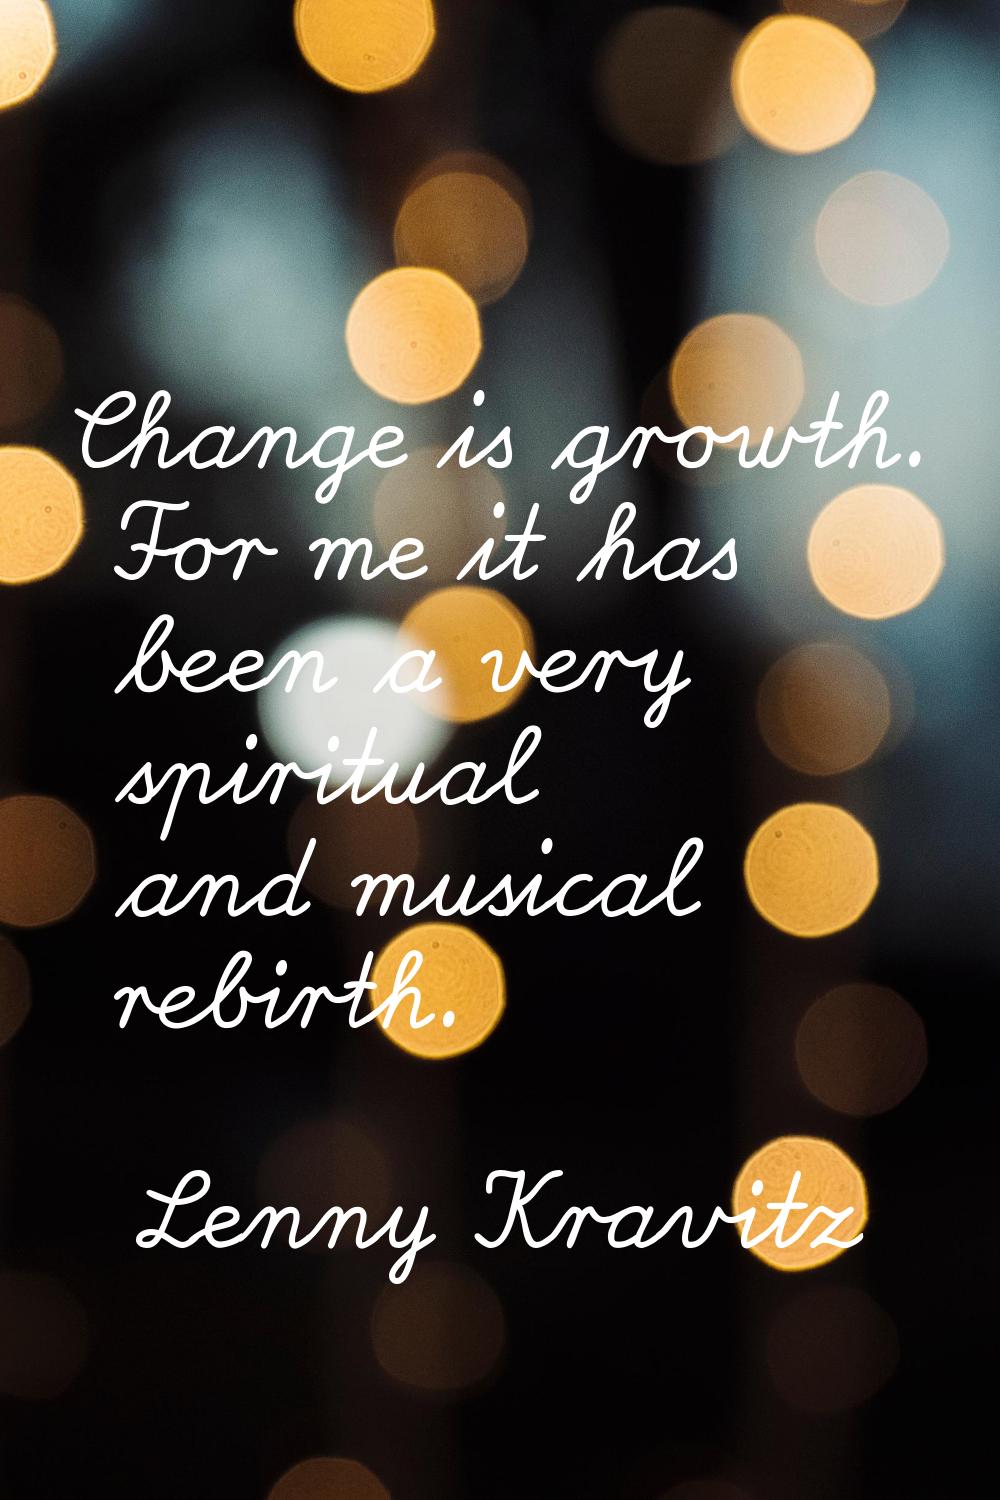 Change is growth. For me it has been a very spiritual and musical rebirth.